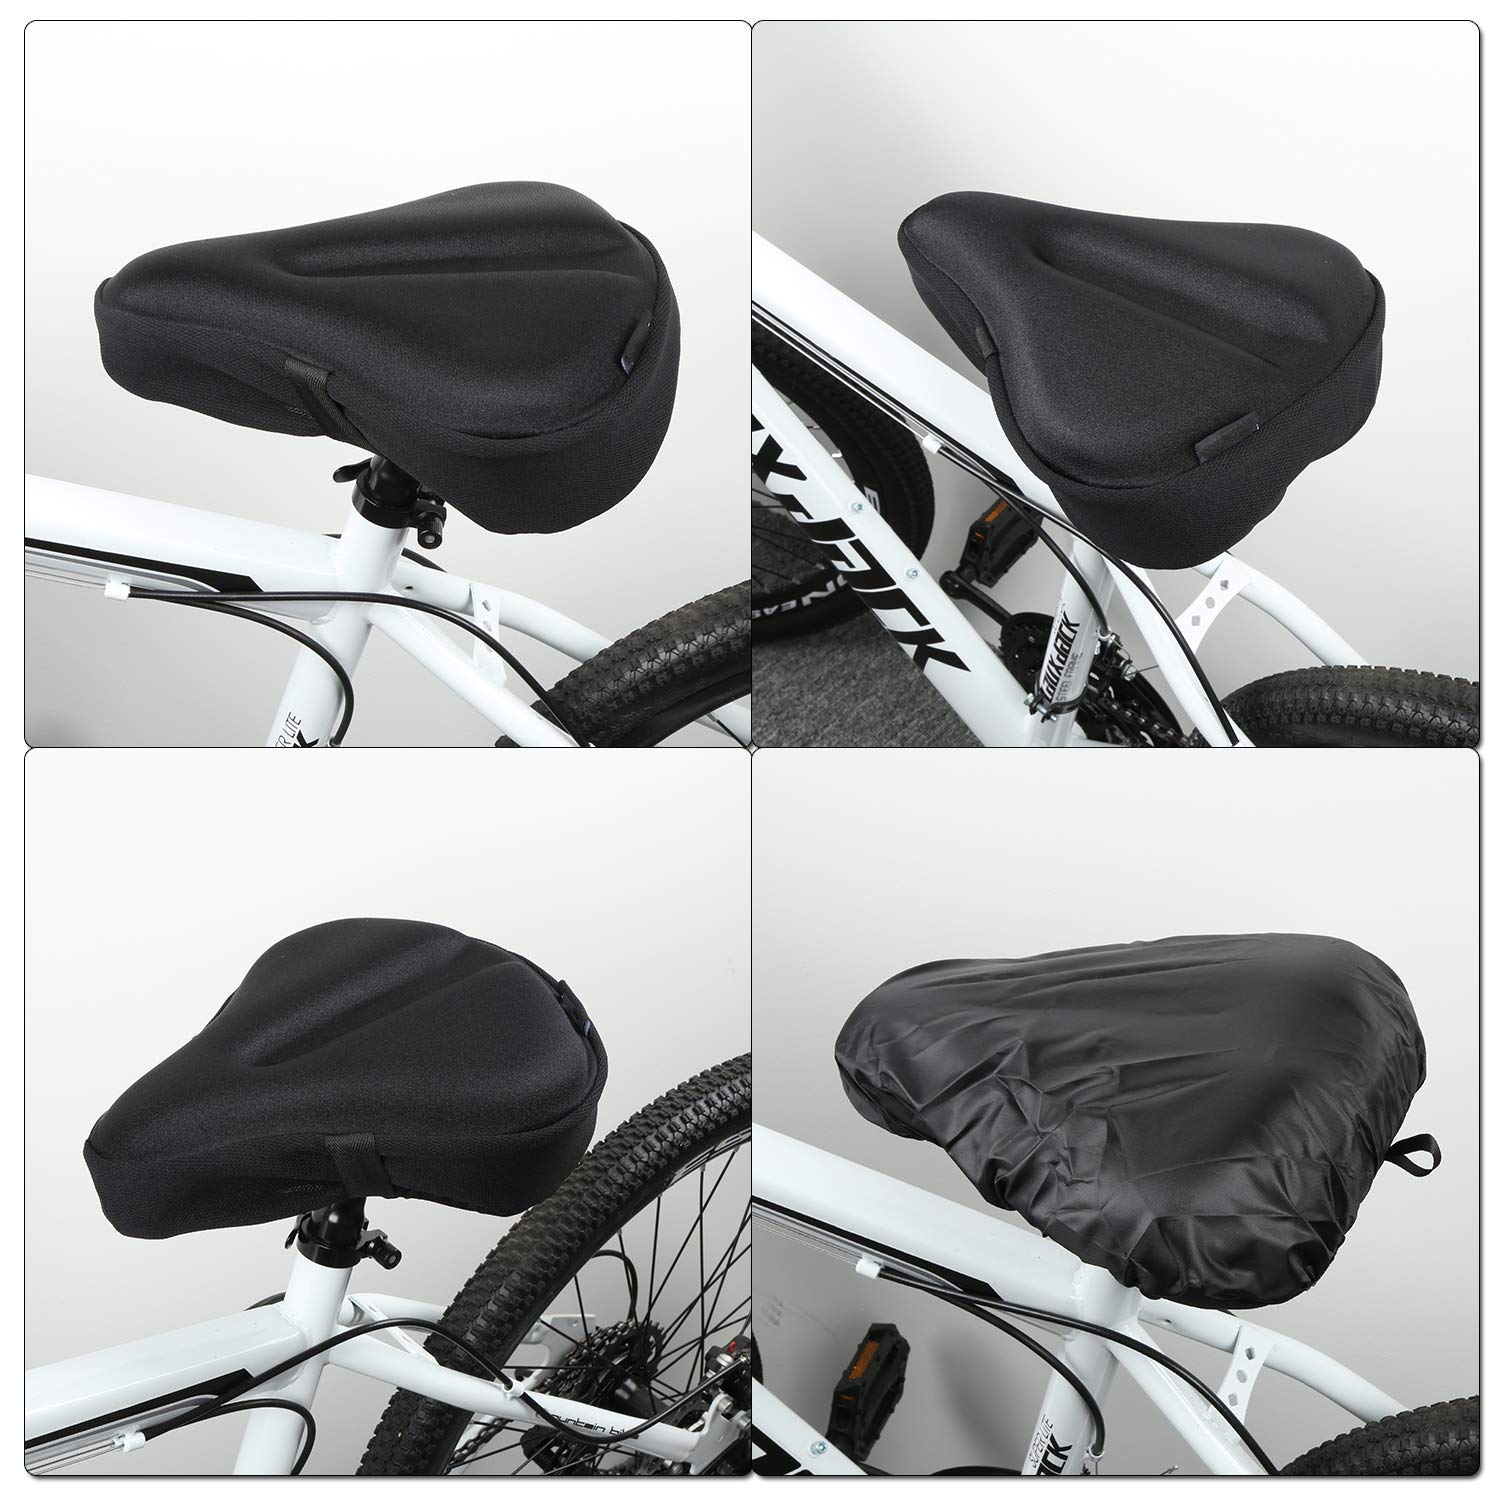 Gusspower Bike Seat Cover Silicone Gel Pad Wide Cushion for Bicycle Saddle Riding for Touring and Indoor Cycling with Water Dust Resistant Cover 